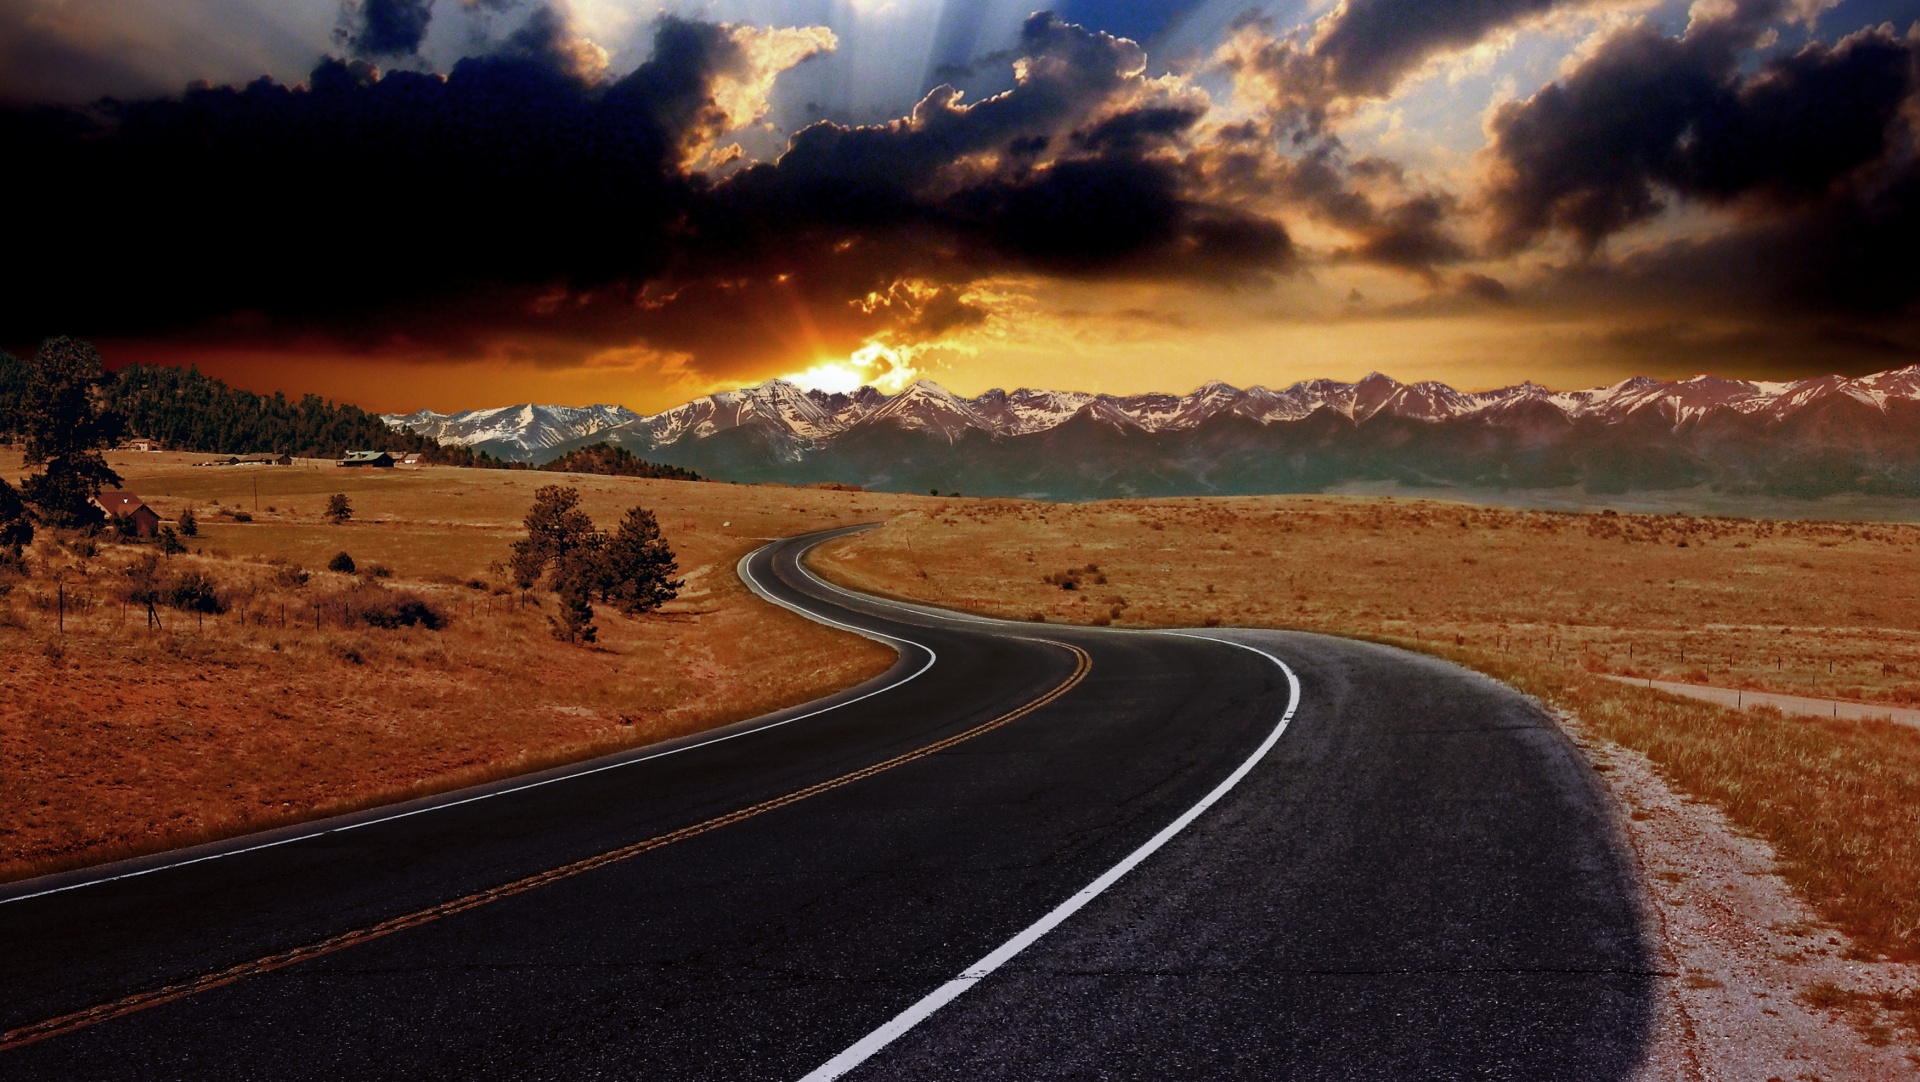 Rural Road To Snow Mountains Free Stock Photo - Public Domain Pictures